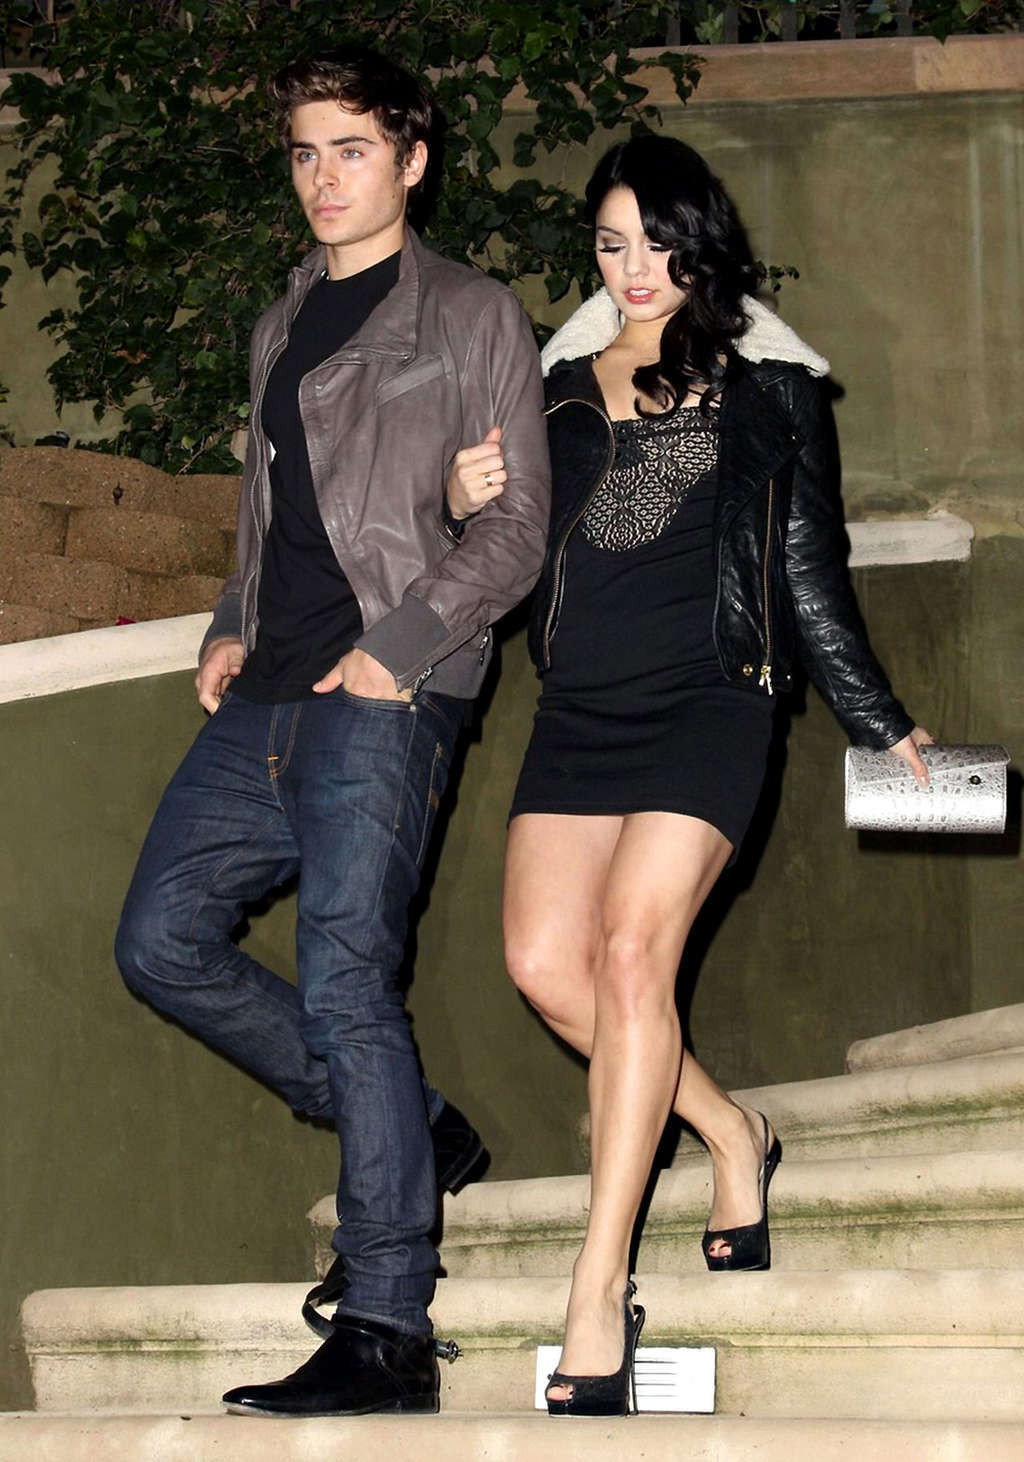 Vanessa Hudgens Leggy In Mini Skirt And Exposing Her Tits And Pussy